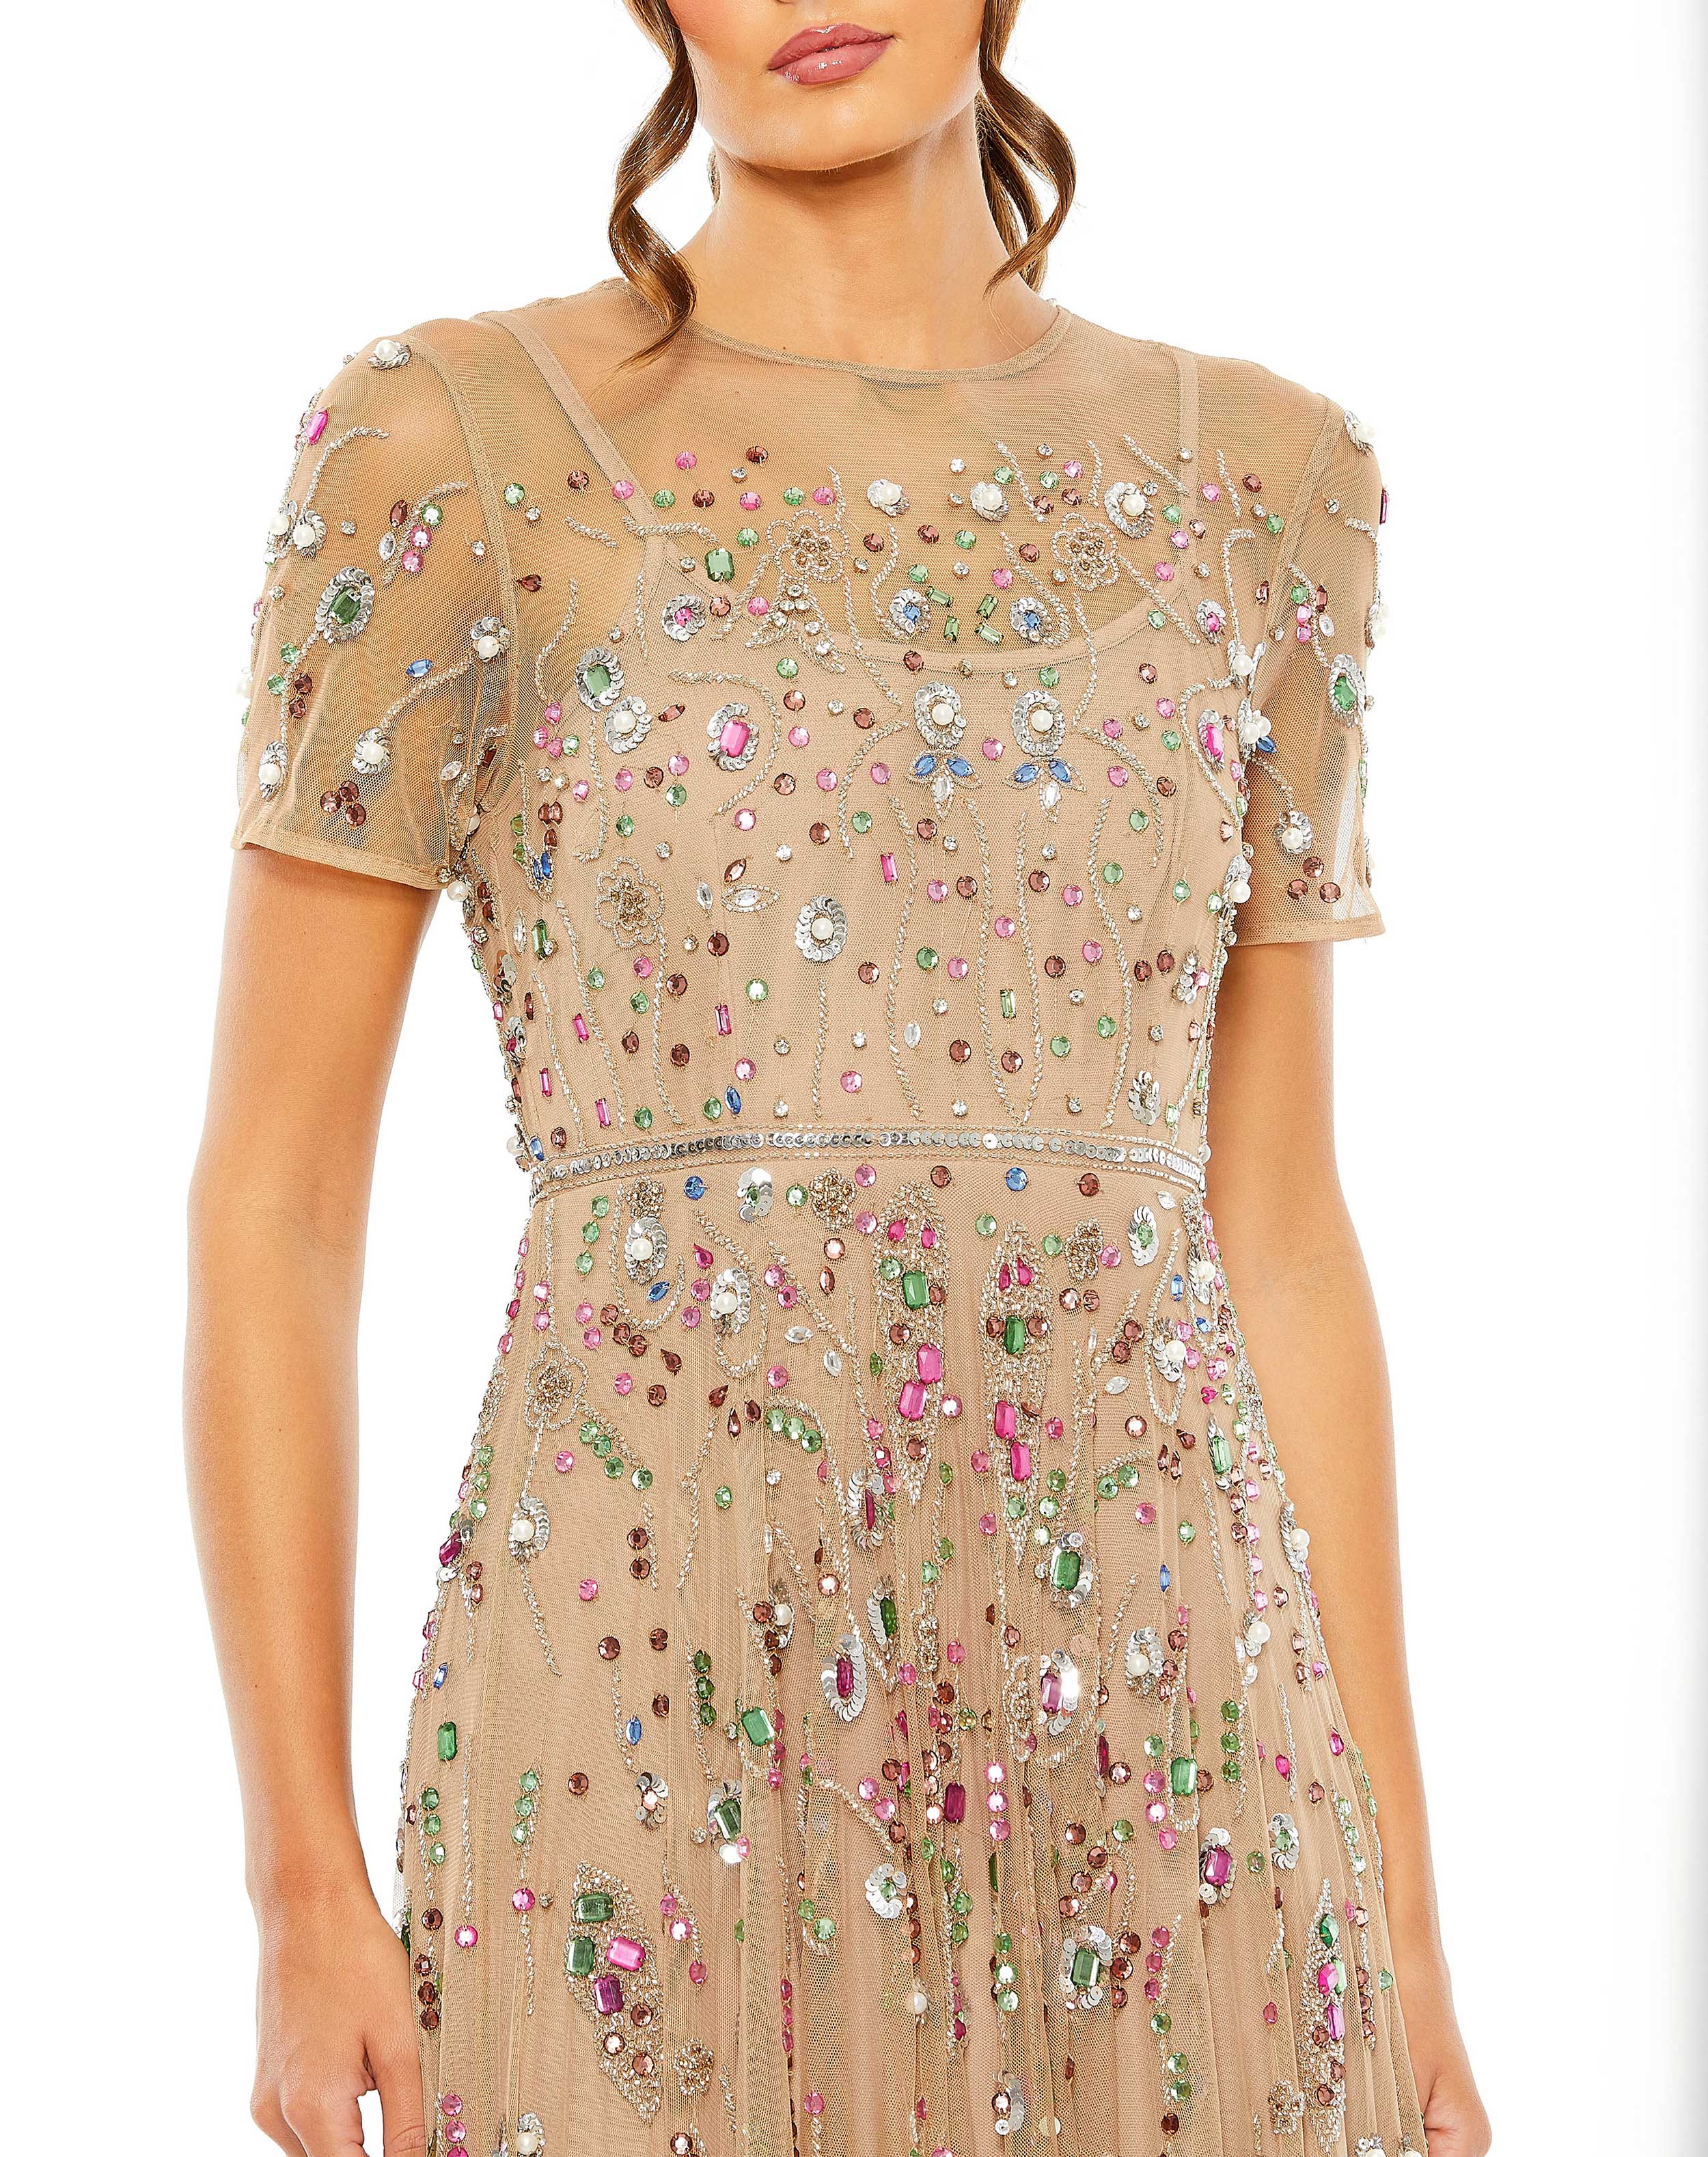 Embellished Sequin Detail A-Line Gown